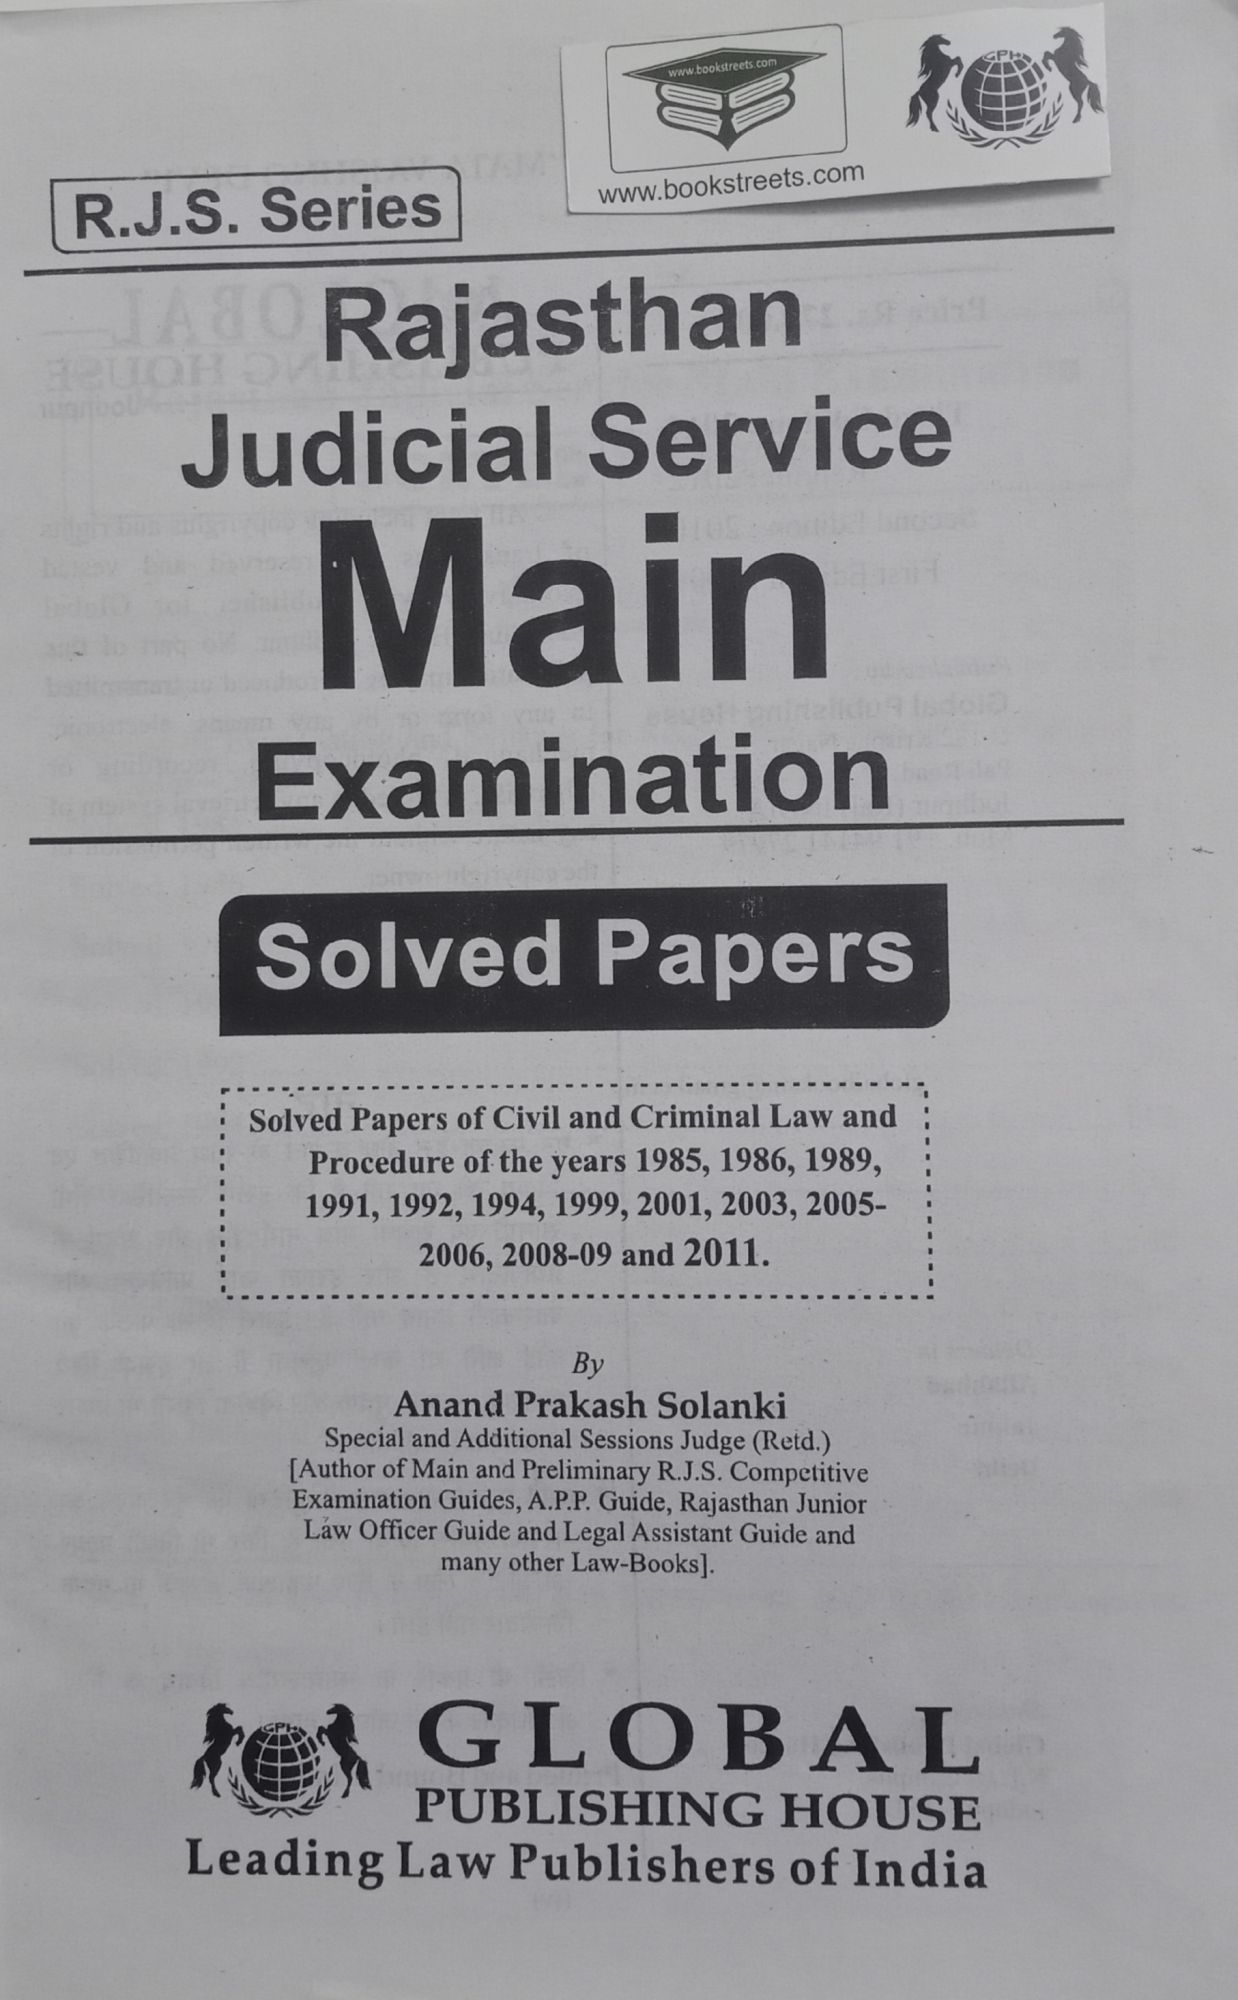 Global's Rajasthan Judicial Service Main Examination Solved Paper Global Publishing House